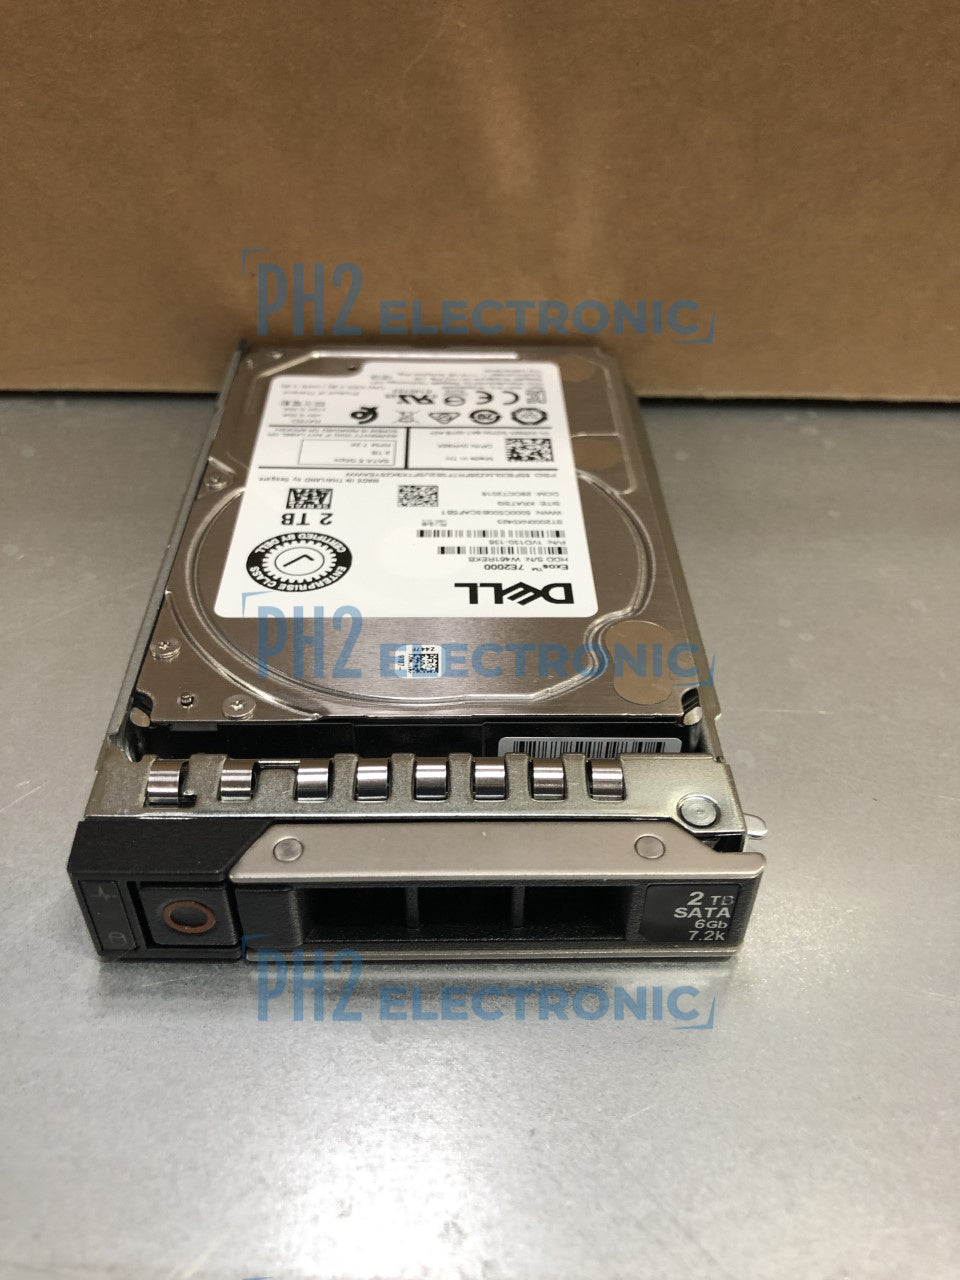 DELL 	ST2000NX0423 	VR92X	0VR92X	2TB 7.2K SATA 2.5'' SFF 6Gb/s Hard Drive HDD WITH R tray